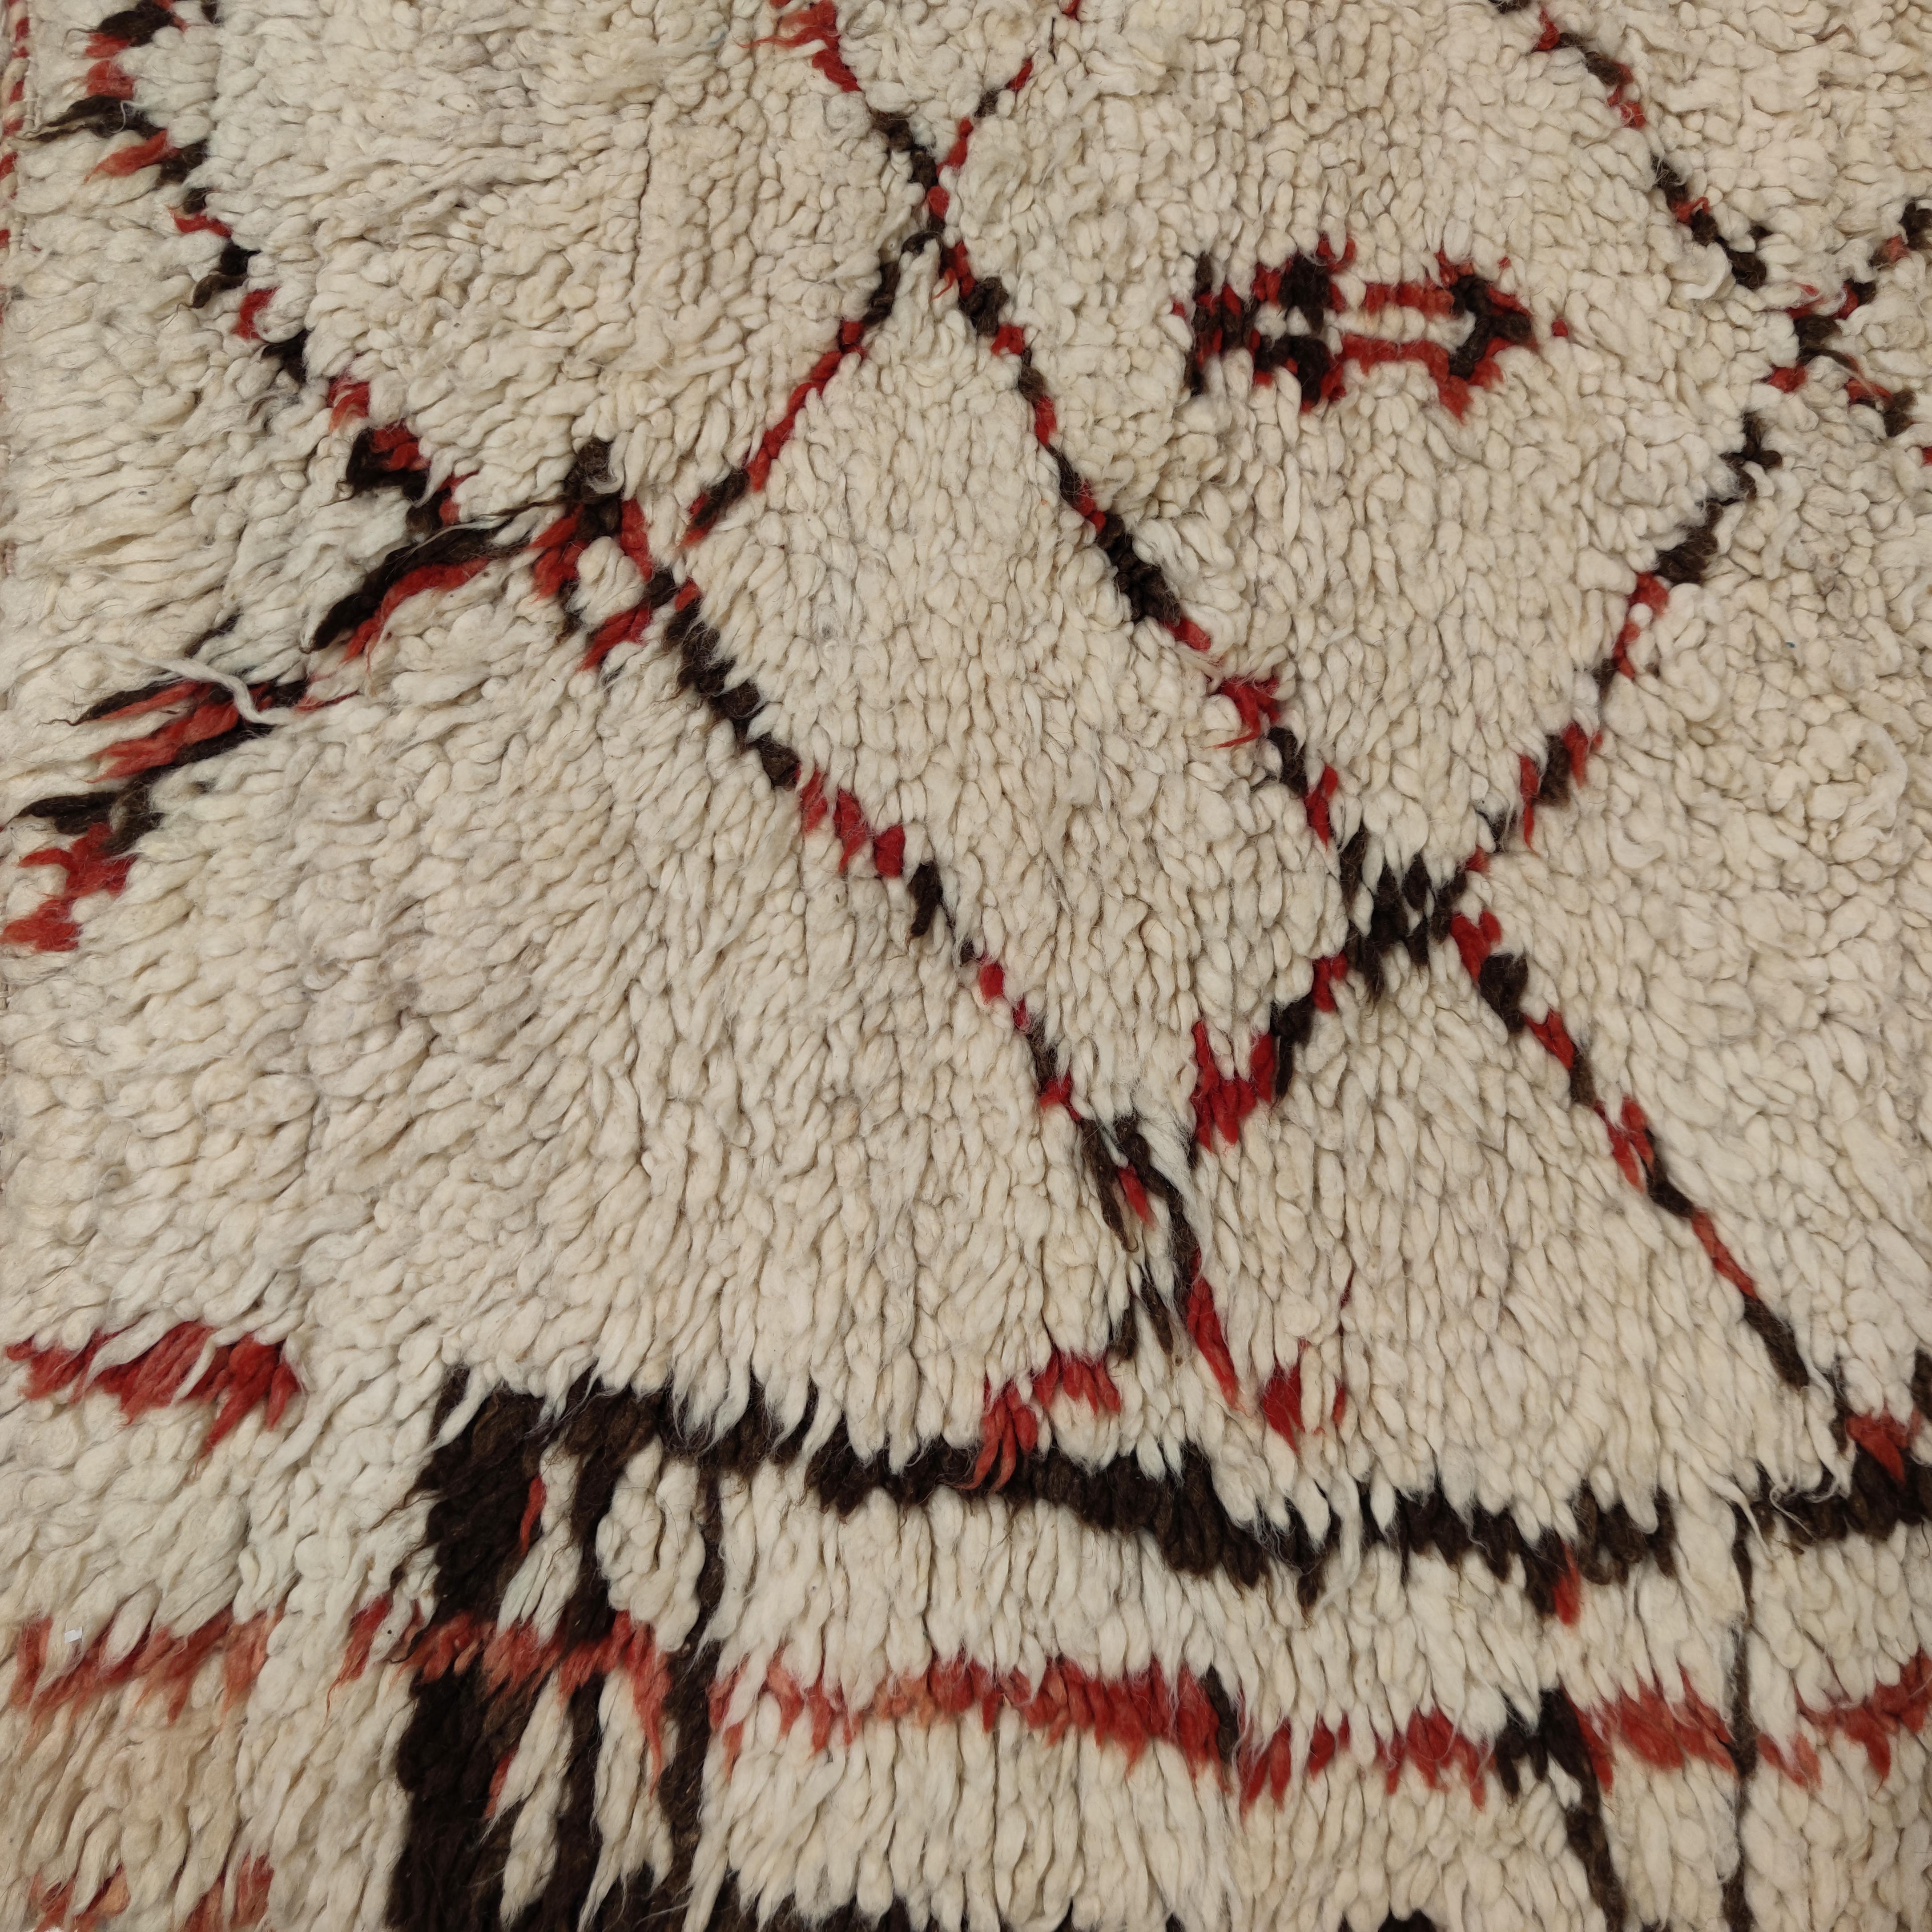 A very interesting group of Berber weavings come from a tribe located close to the border with Algeria, in the eastern region of Morocco. The Ait Bou Ichaouen rugs from the settlements north of Talsint offer a more colourful version of traditional